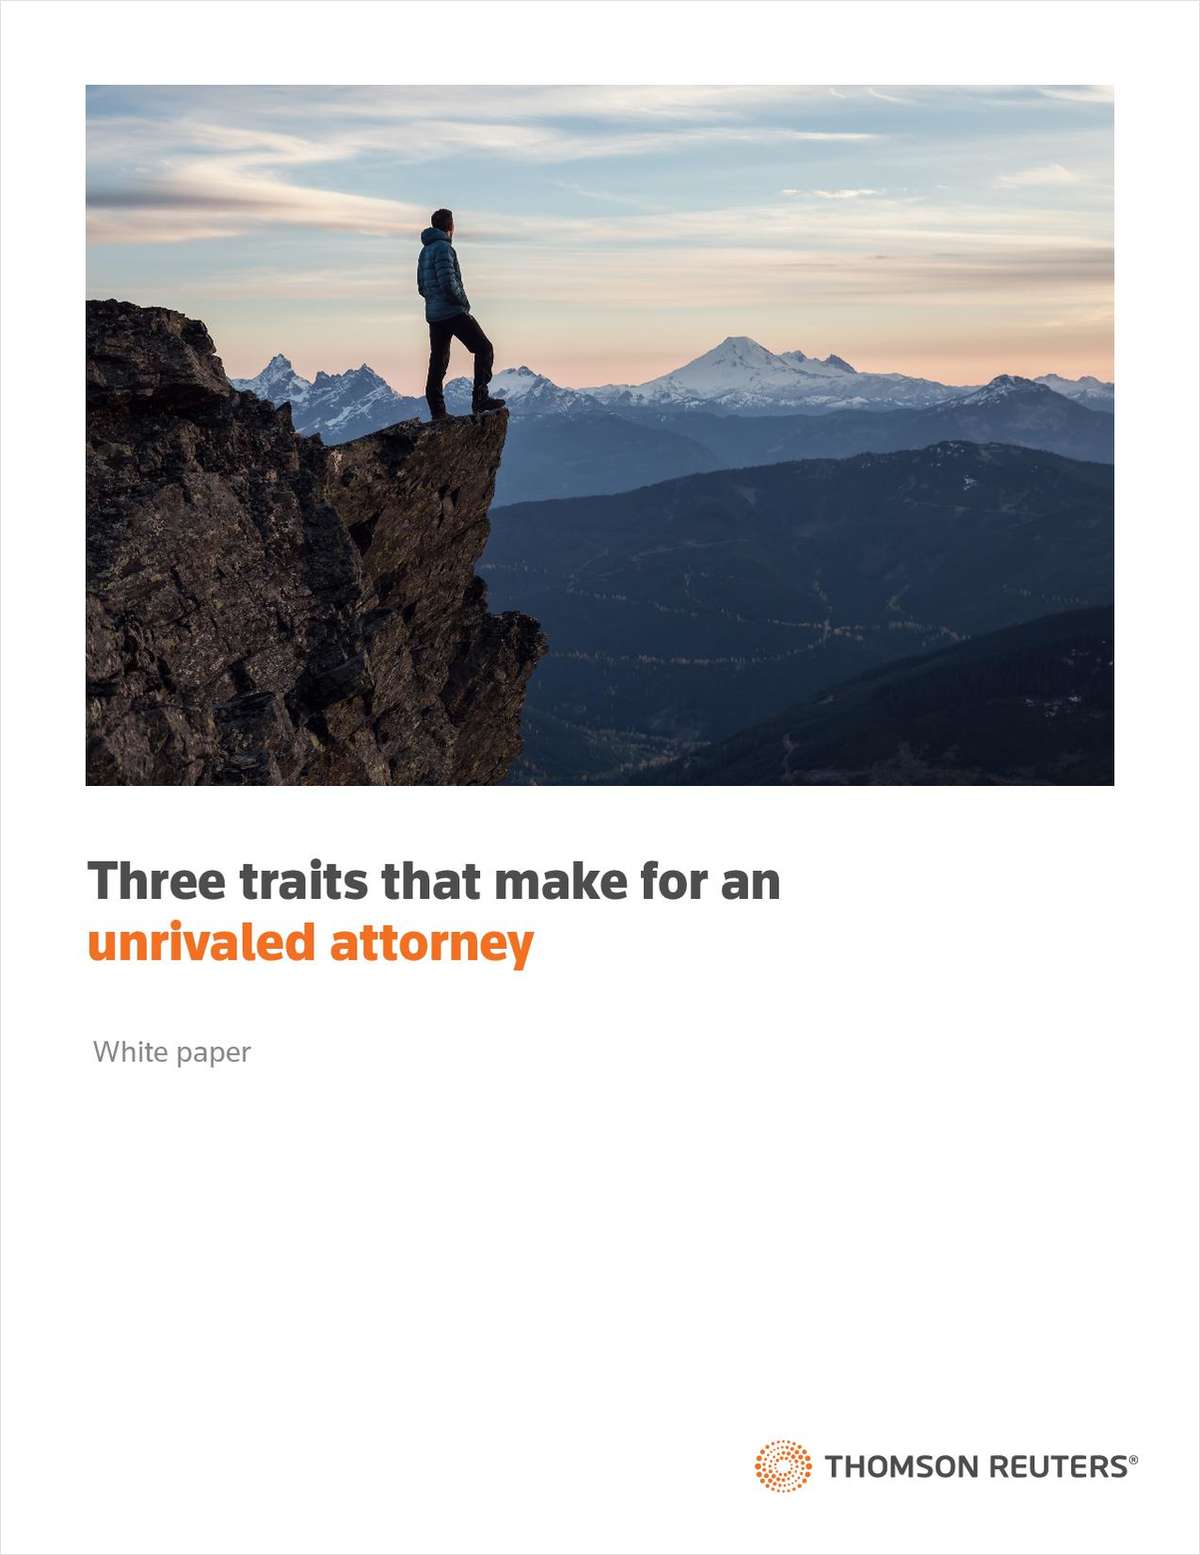 When tackling a new legal matter, attorneys and clients want to feel unrivaled. But what is “unrivaled,” and how do you get there? Explore 3 traits of an unrivaled attorney and how they align to put you out front of other lawyers.